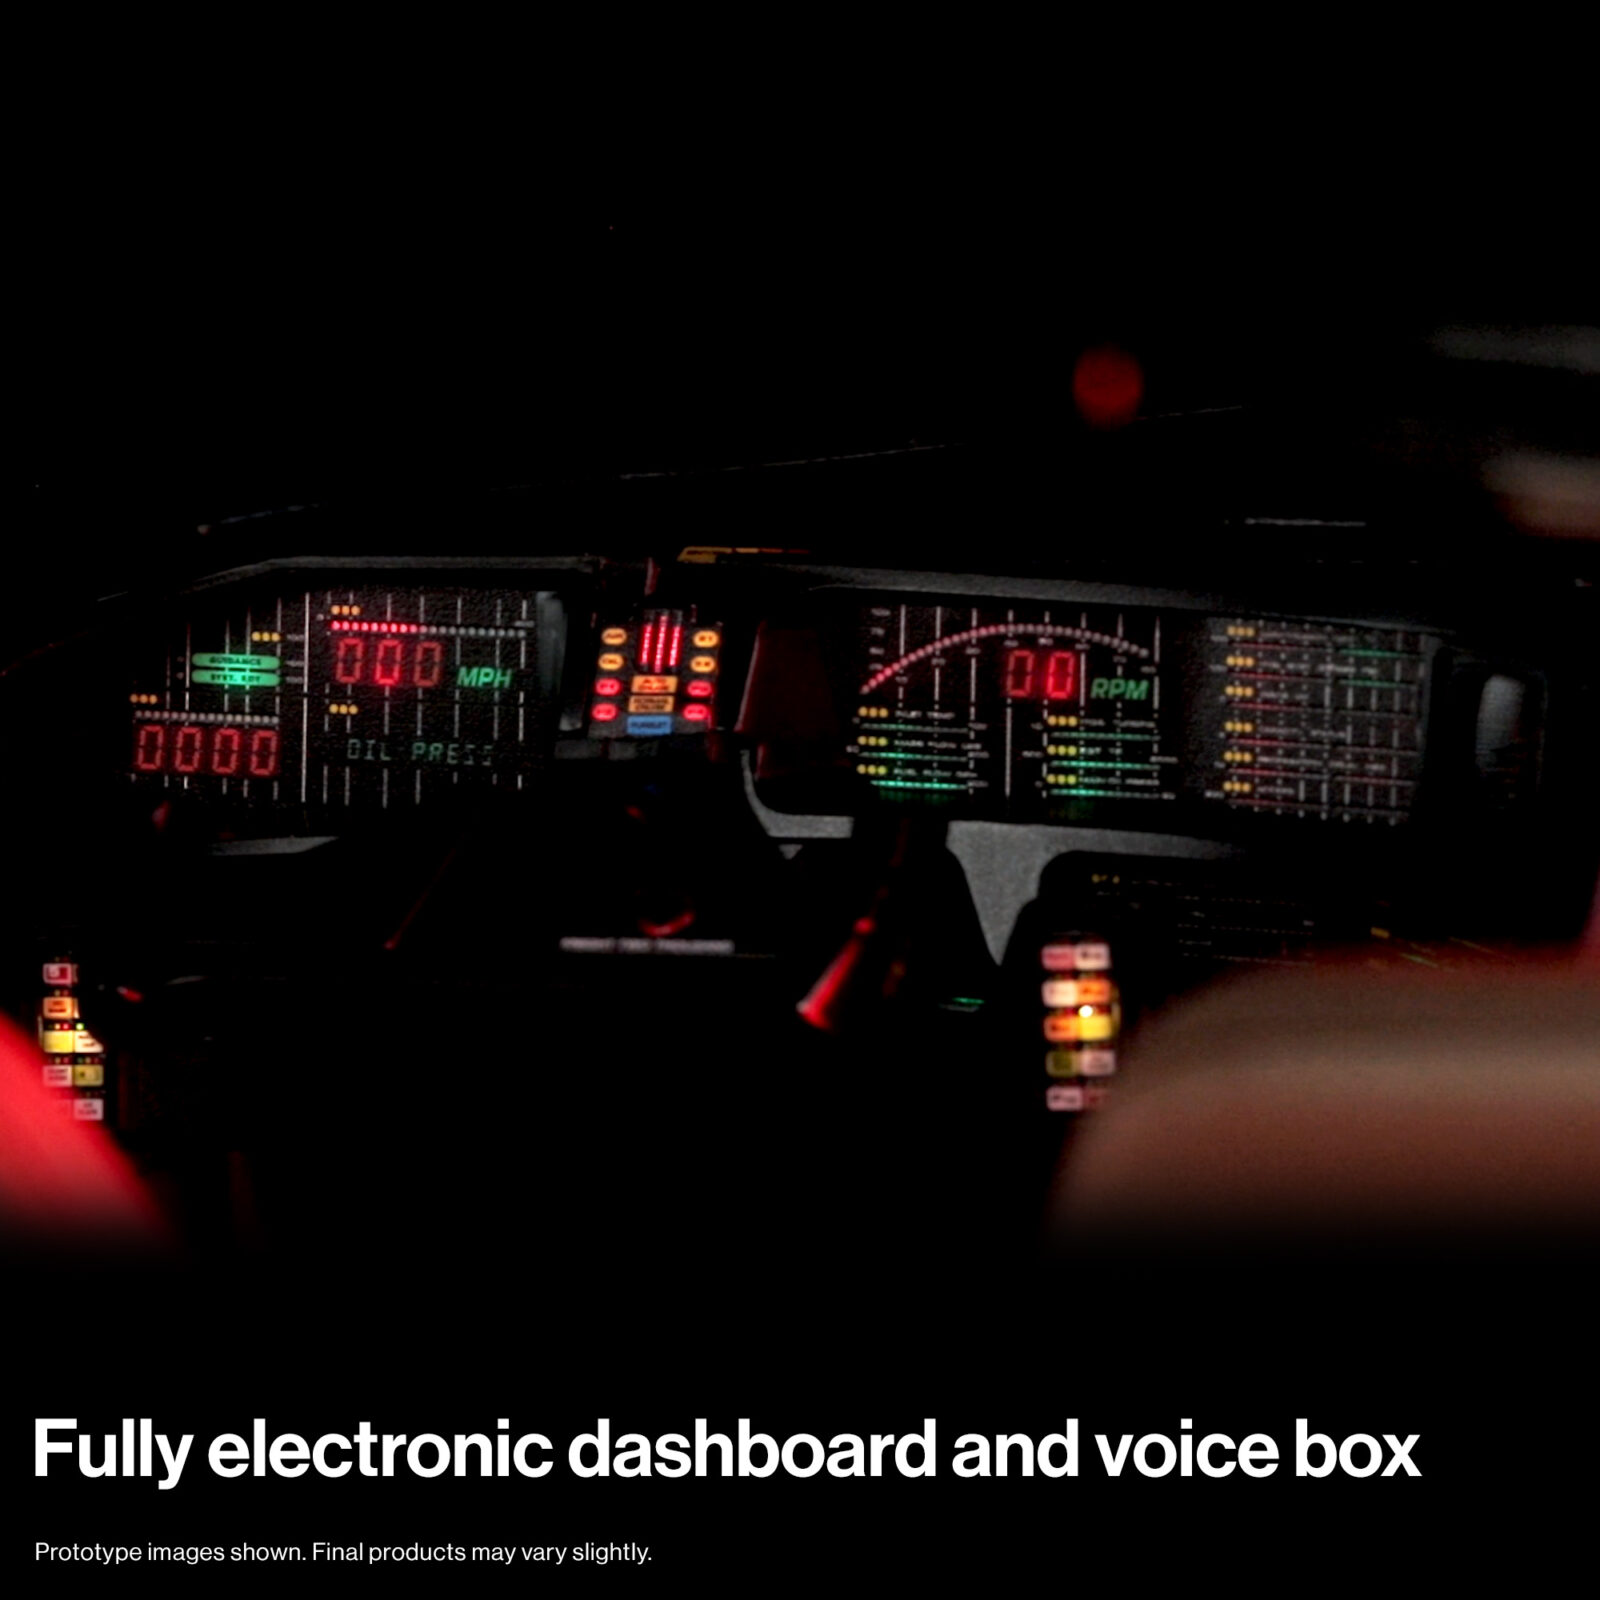 KITT fully electronic dashboard and voice box